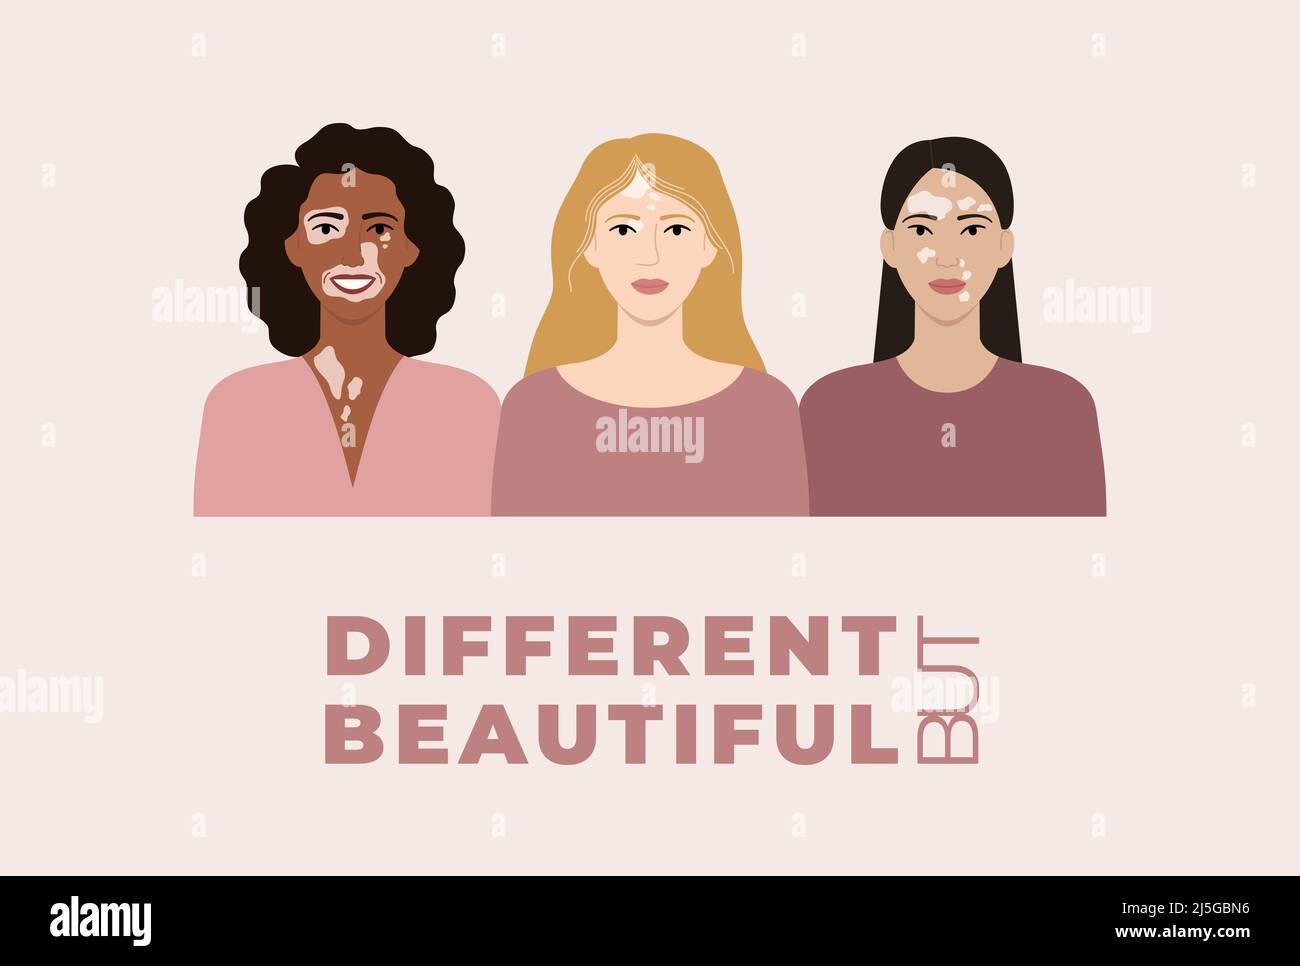 Female faces with vitiligo skin disease banner. Different but beautiful concept. Portraits with different ethnics, skin colors, hairstyles with vitili Stock Vector